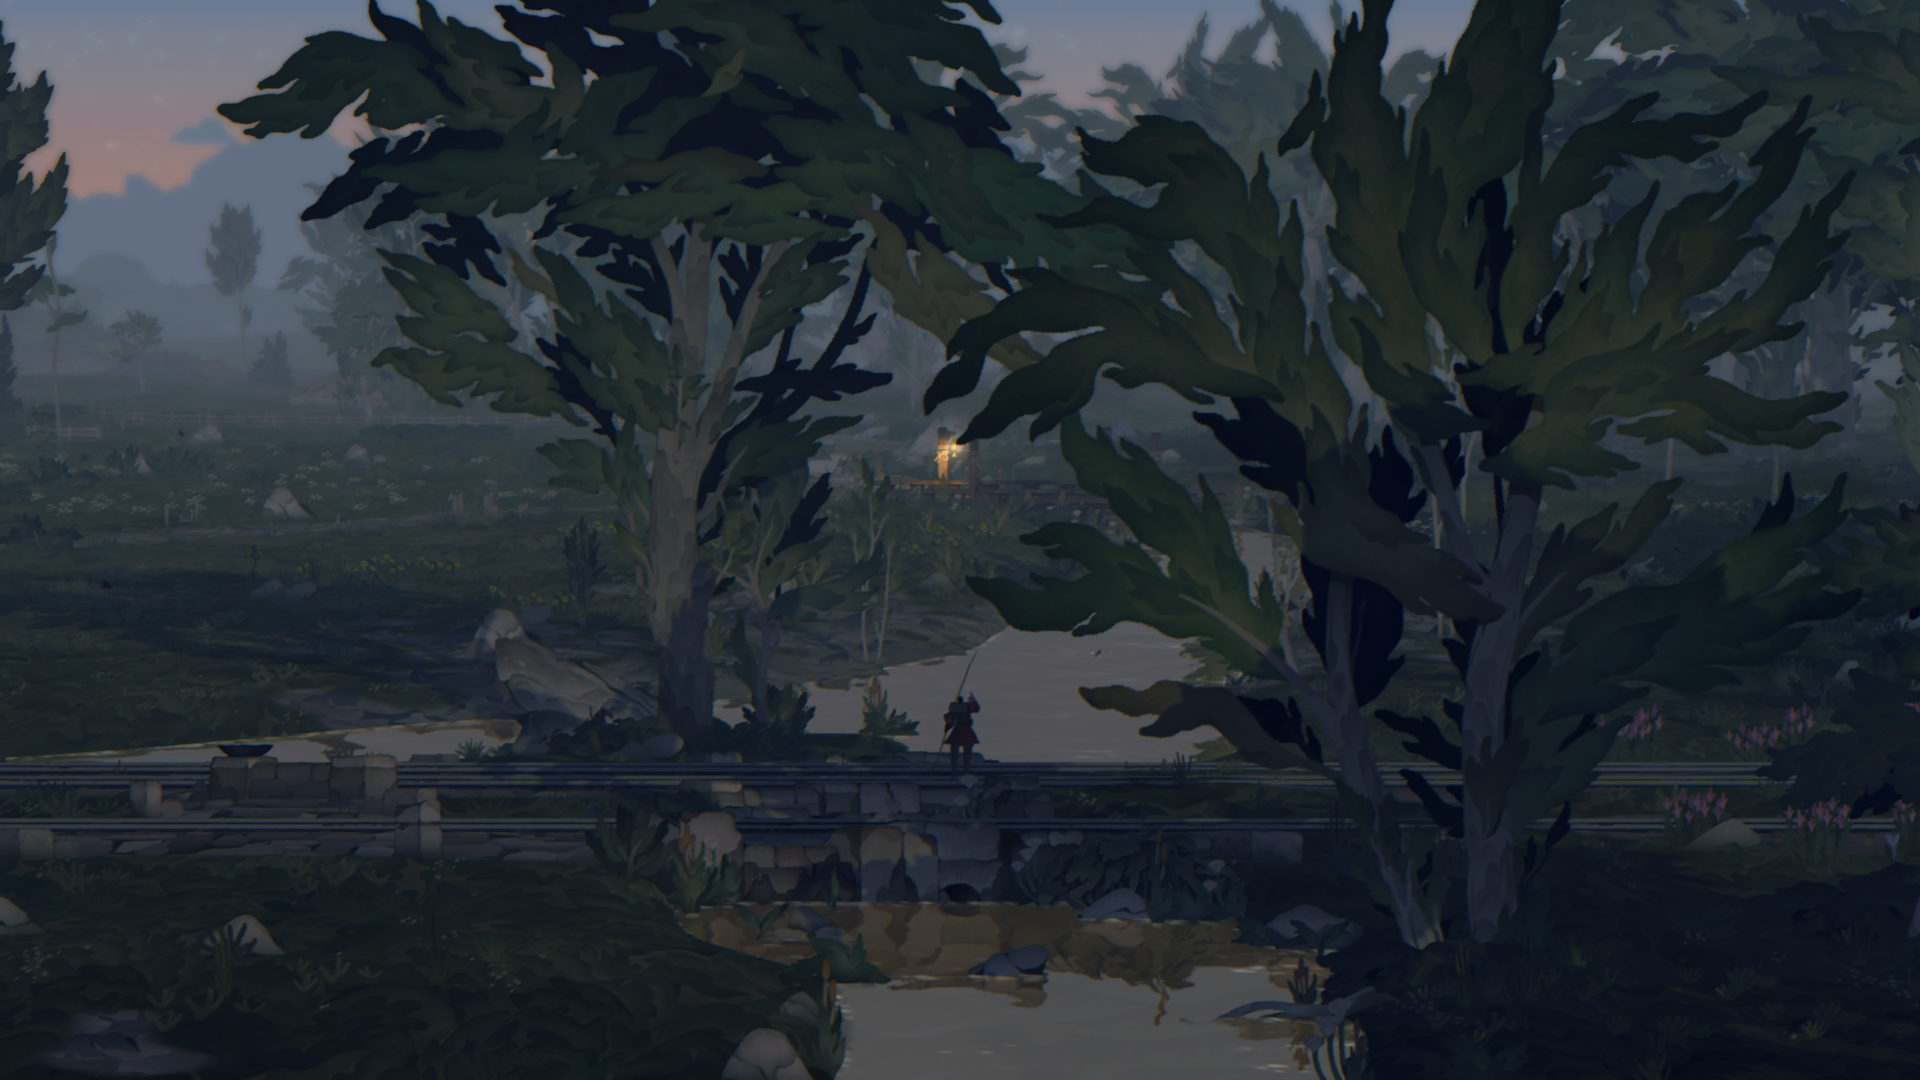 An image from the game Book of Travels featuring a character fishing serenely at dawn. The scene is set near a canal with a railway crossing it, surrounded by trees, and a peaceful meadow in the background.